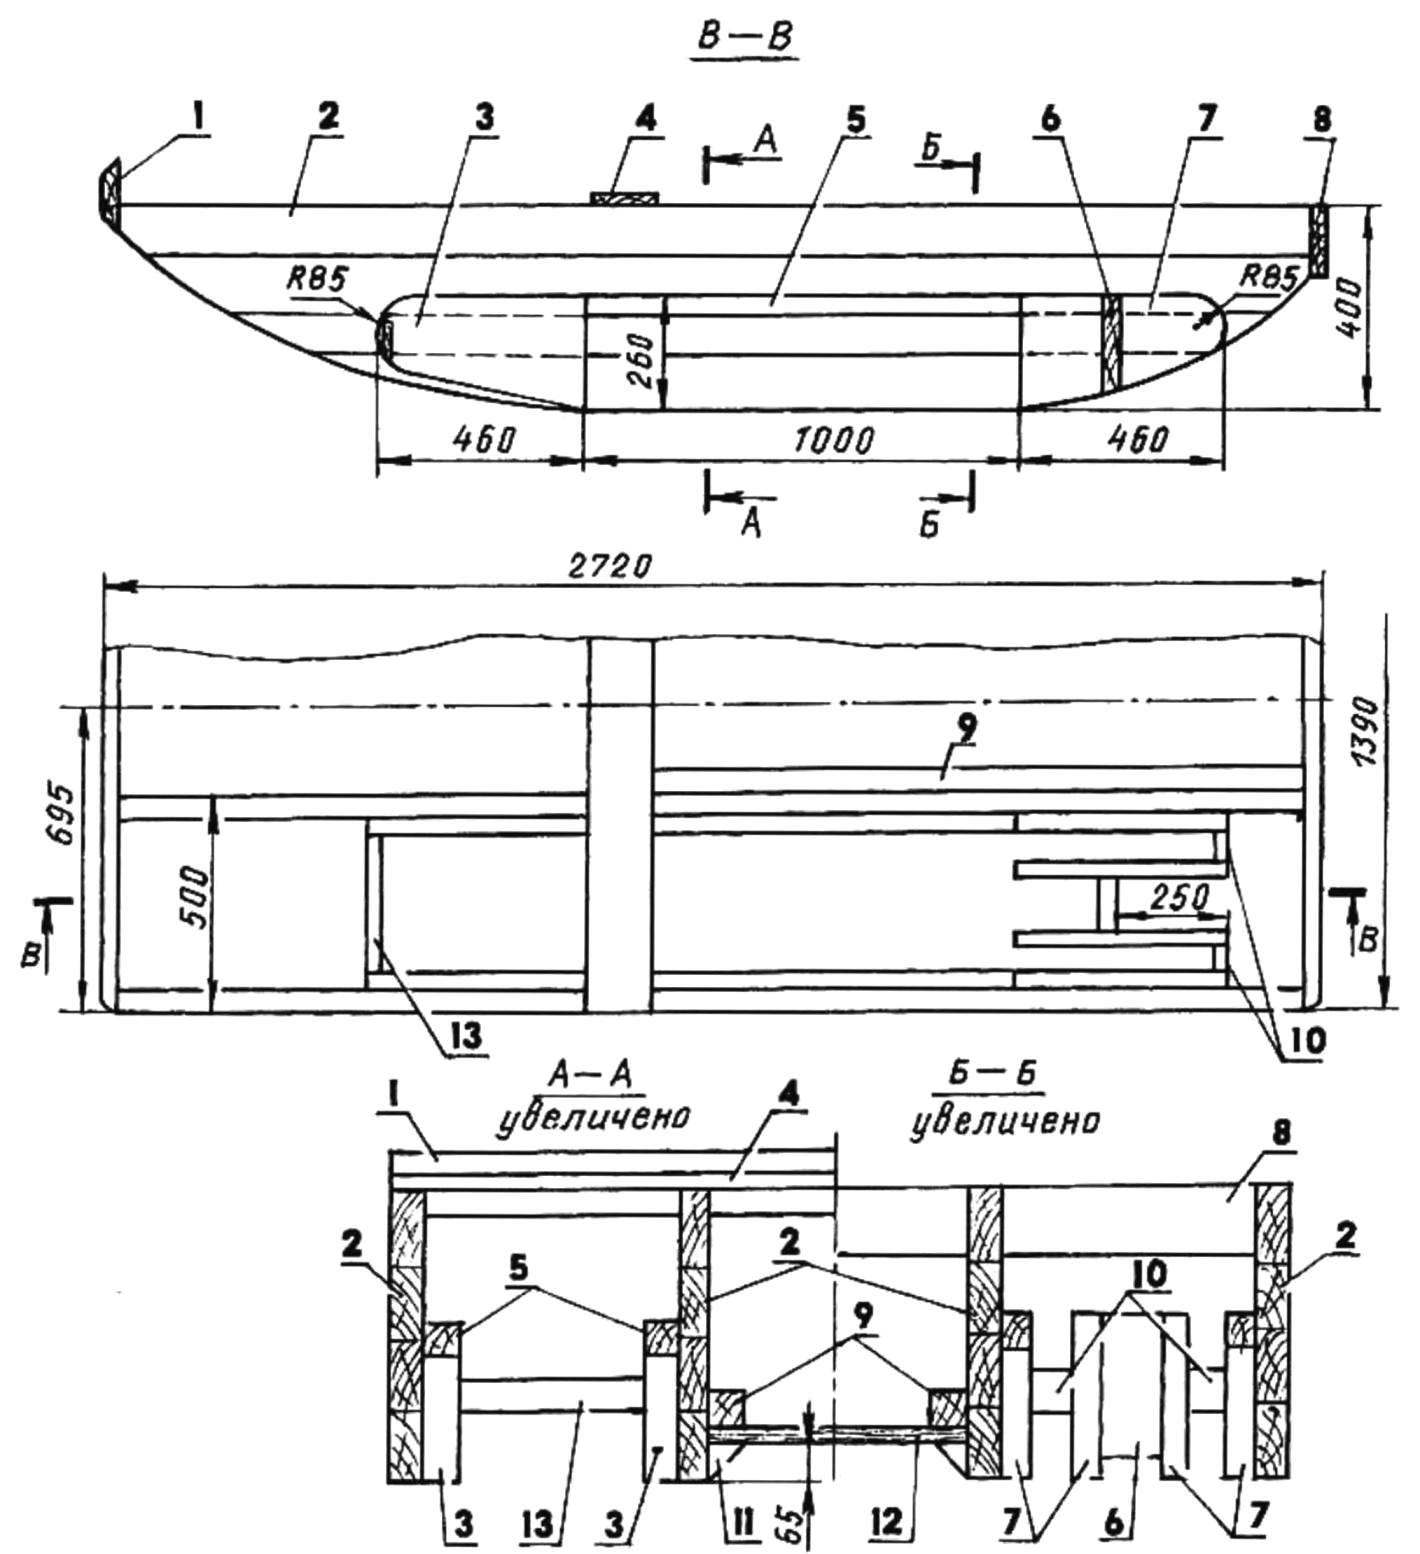 The frame of the snowmobile (without body cladding)